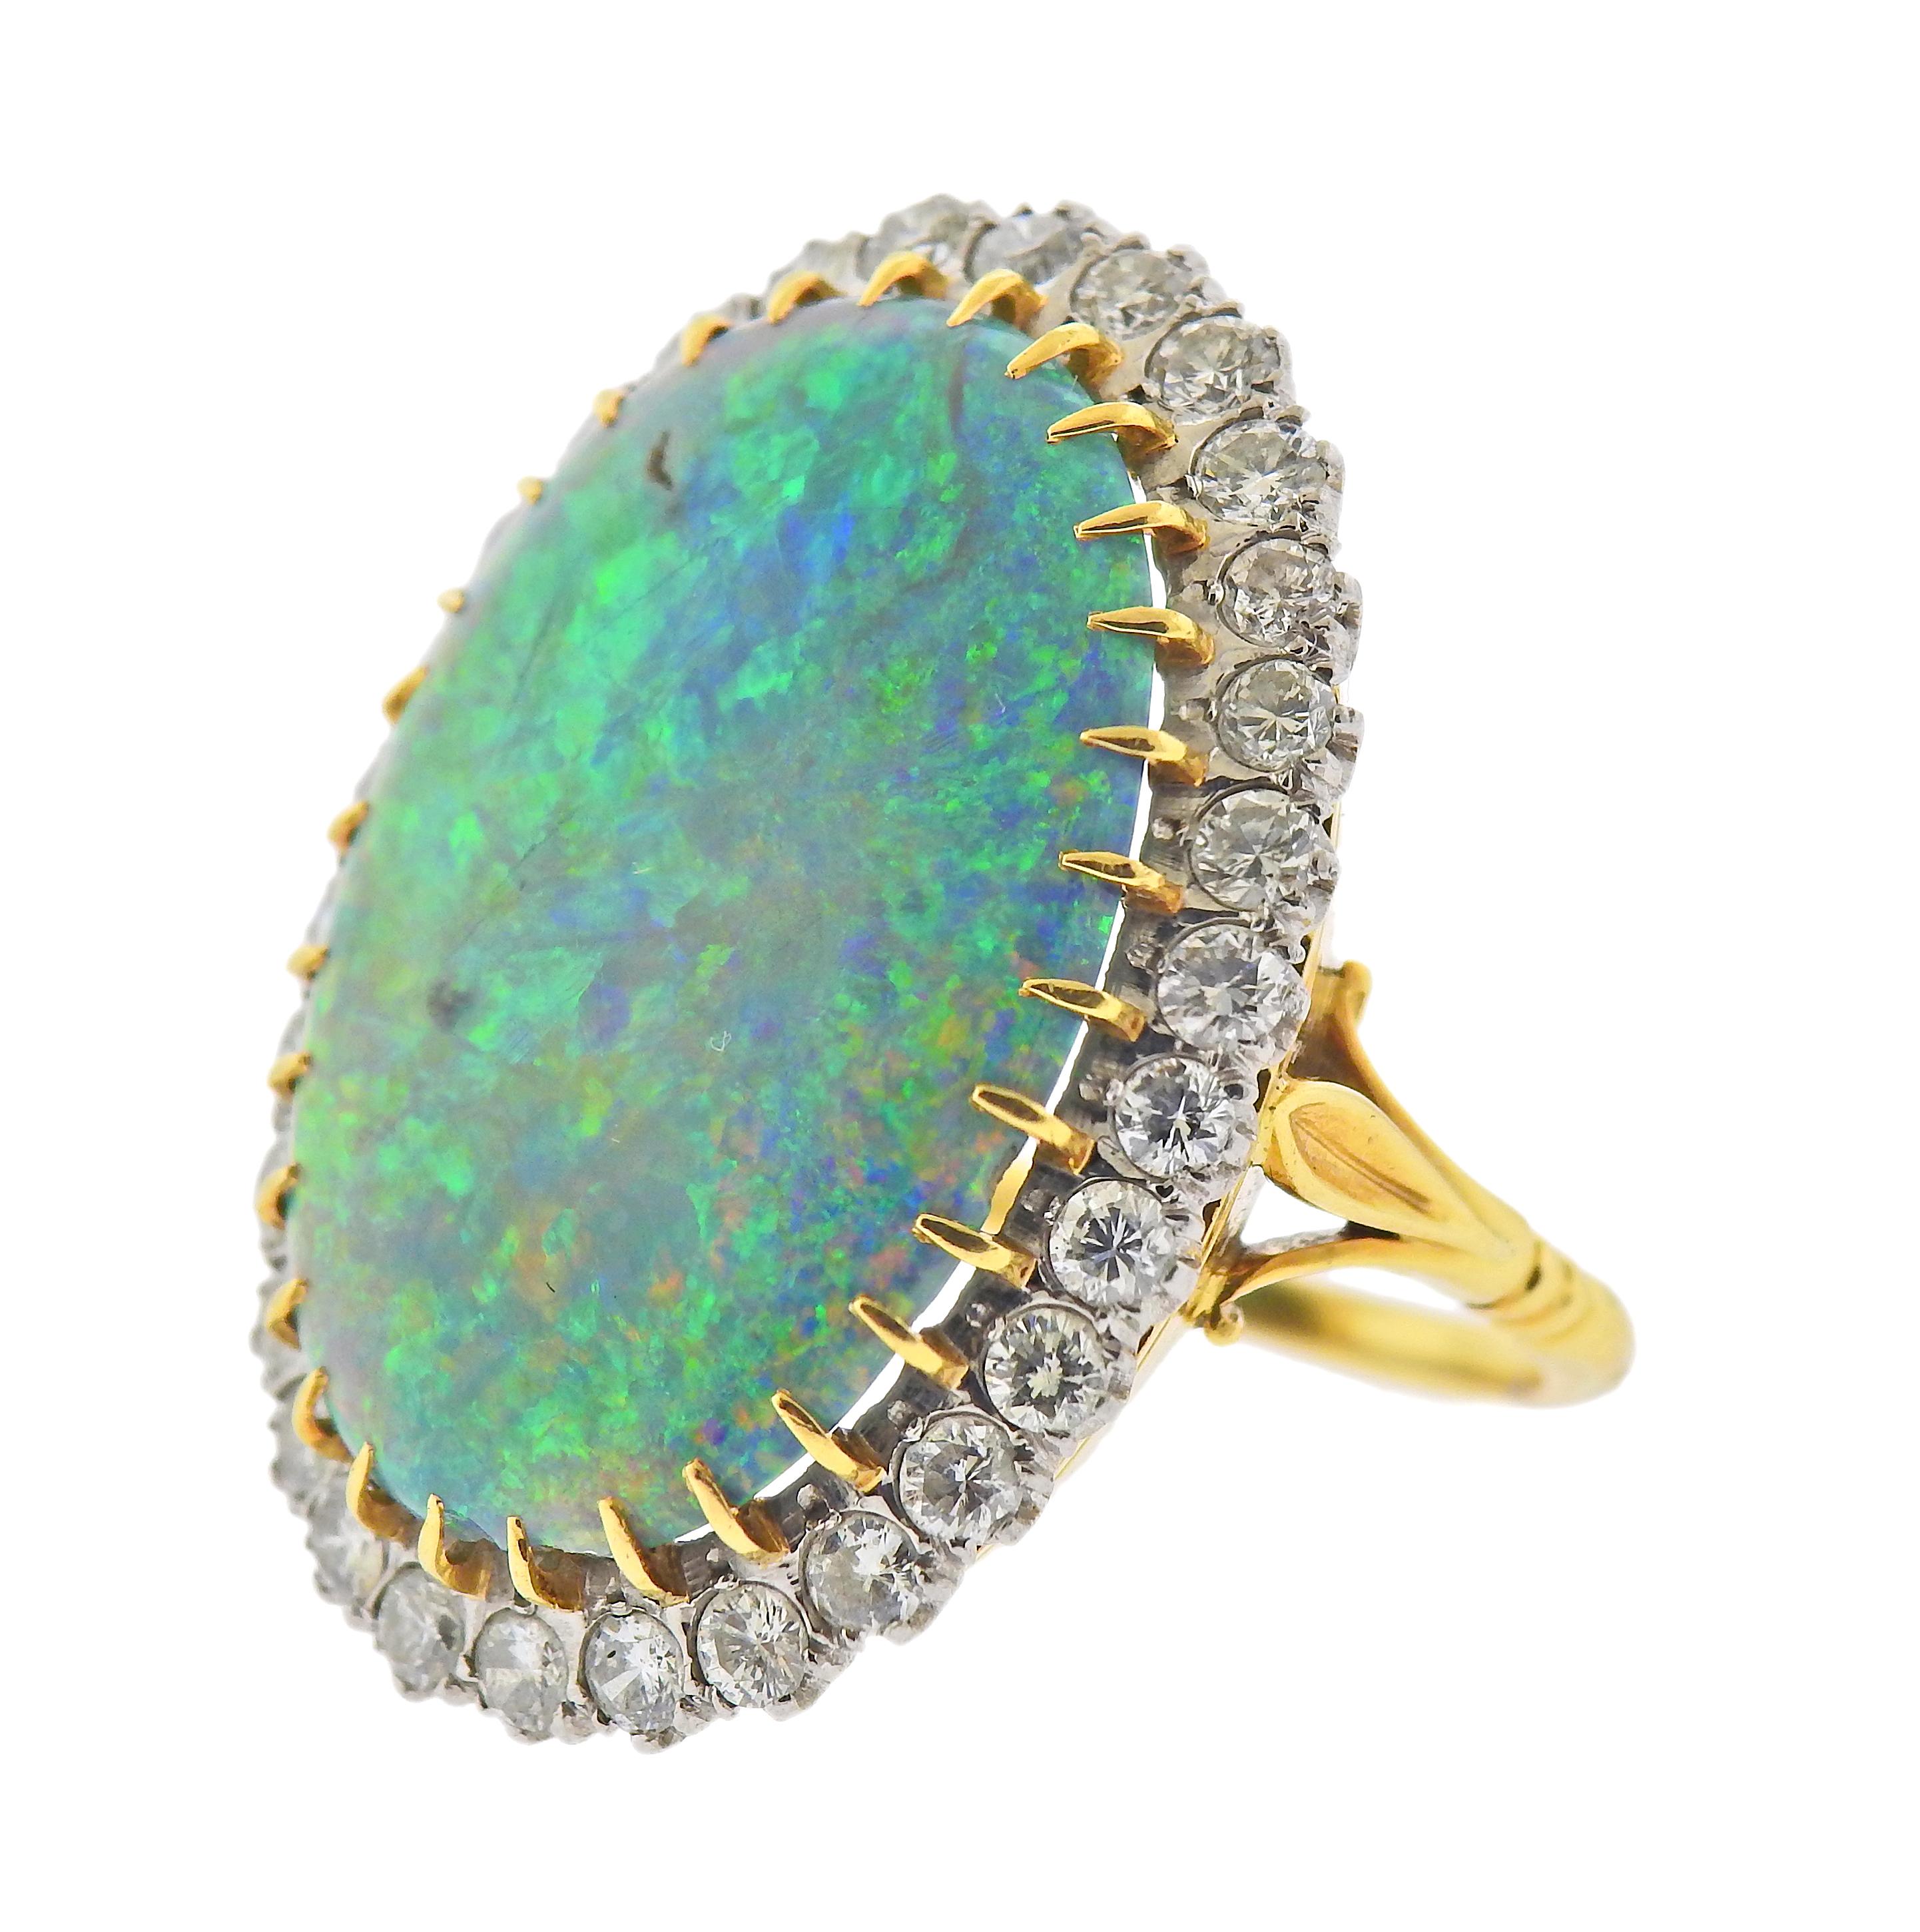 18k gold cocktail ring, with oval 25 x 18.3mm x 4.9mm opal, surrounded with approx. 1.60ctw in diamonds. Ring size - 7, ring top - 31mm x 25mm. Weight - 12.9 grams. 